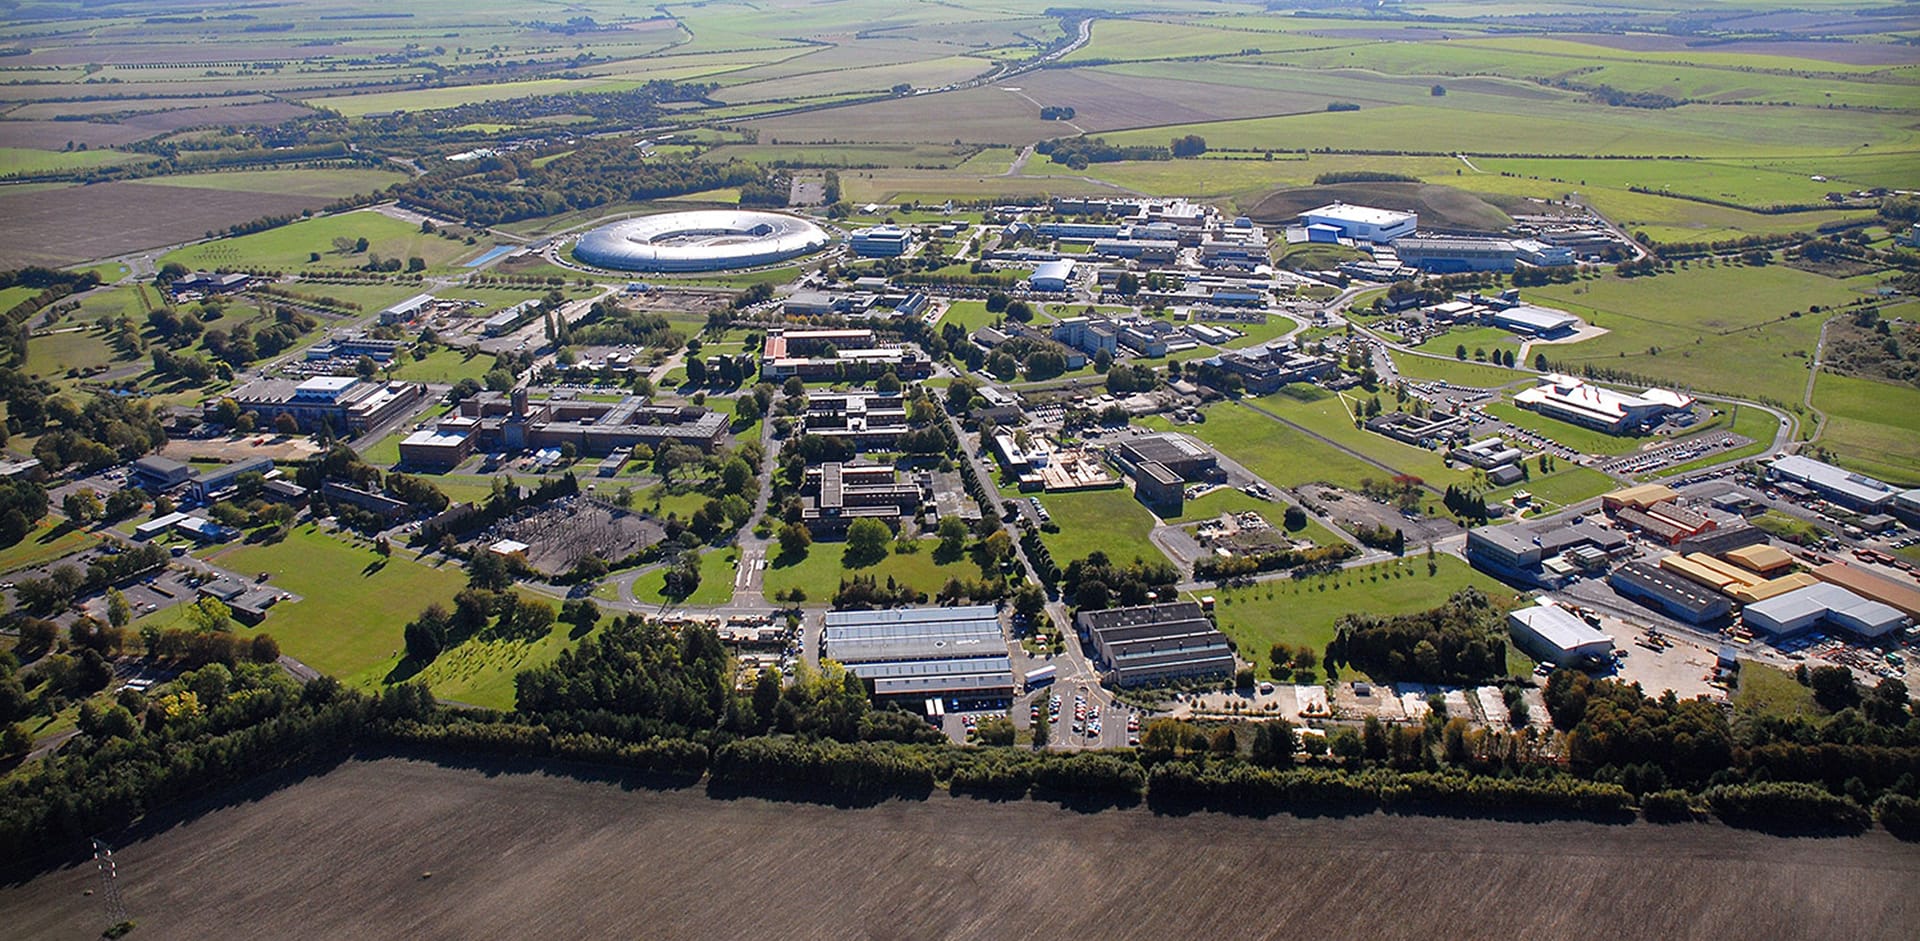 Harwell Campus gets major funding boost as Brookfield Asset Management acquires 50% stake in joint venture